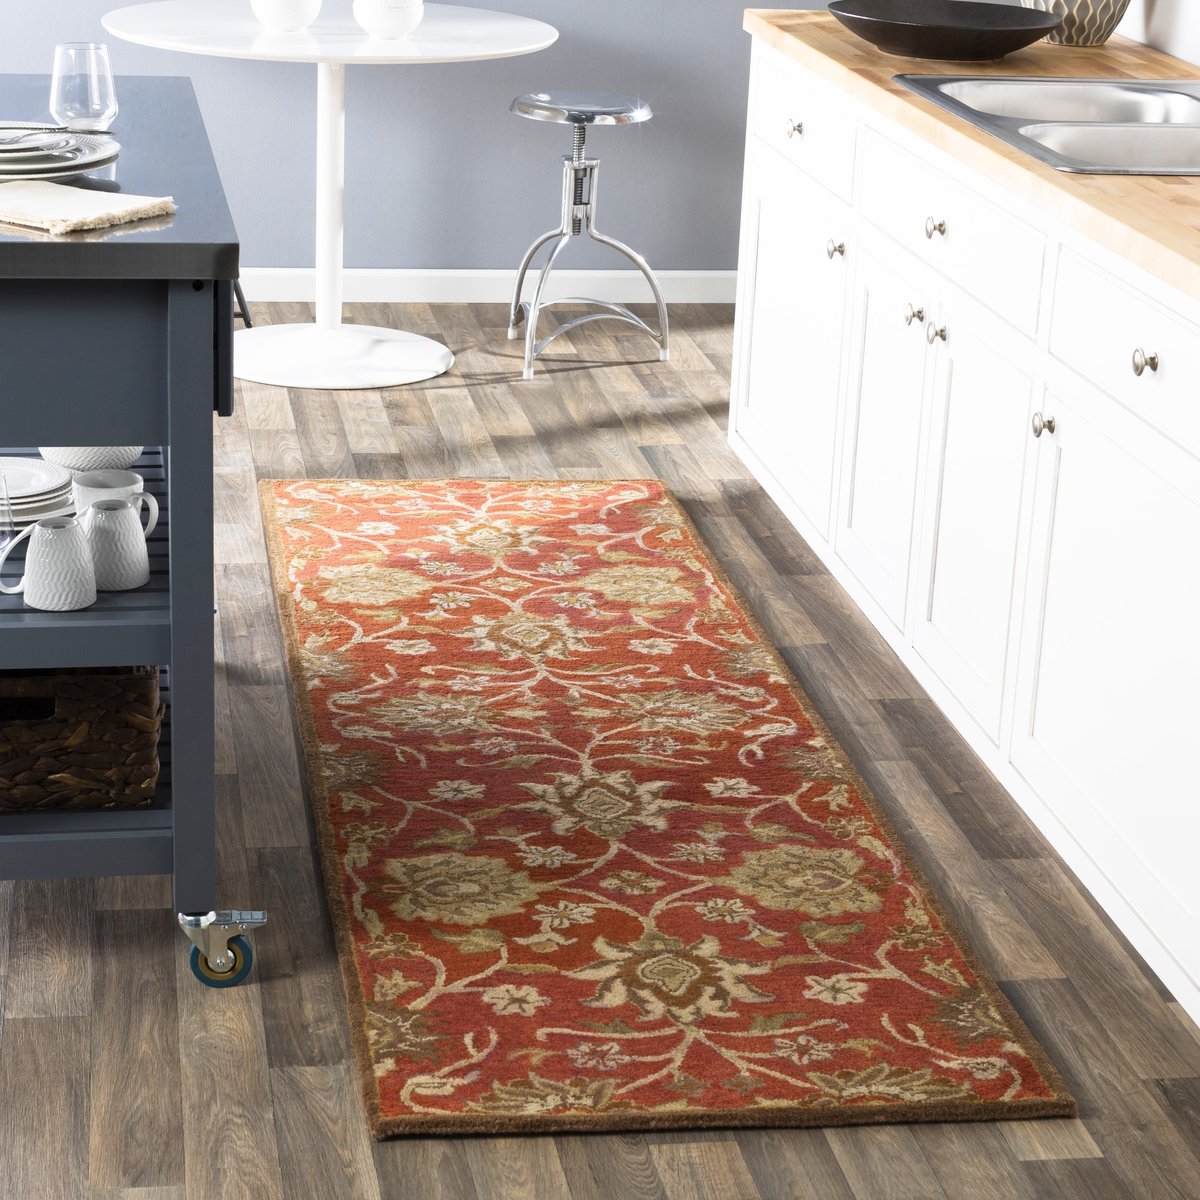 Kitchen Rugs - Oriental Rug Sizing Guide